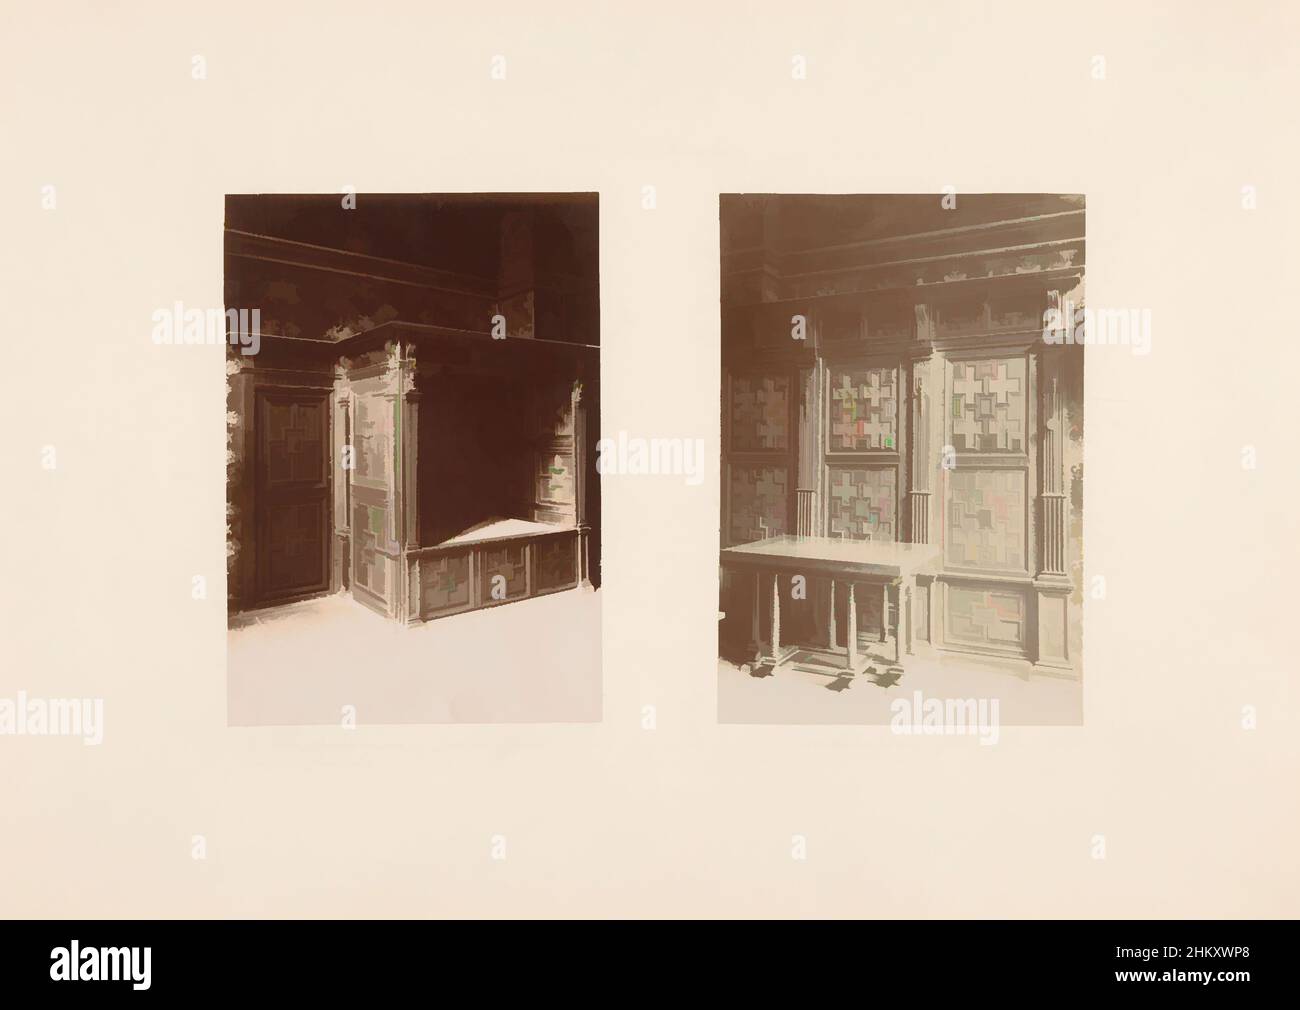 Art inspired by View of two wall paneling, On the left a wall paneling with a bed, on the right a wall paneling with cross motifs., Netherlands, c. 1875 - c. 1900, cardboard, photographic support, height 314 mm × width 445 mm, Classic works modernized by Artotop with a splash of modernity. Shapes, color and value, eye-catching visual impact on art. Emotions through freedom of artworks in a contemporary way. A timeless message pursuing a wildly creative new direction. Artists turning to the digital medium and creating the Artotop NFT Stock Photo